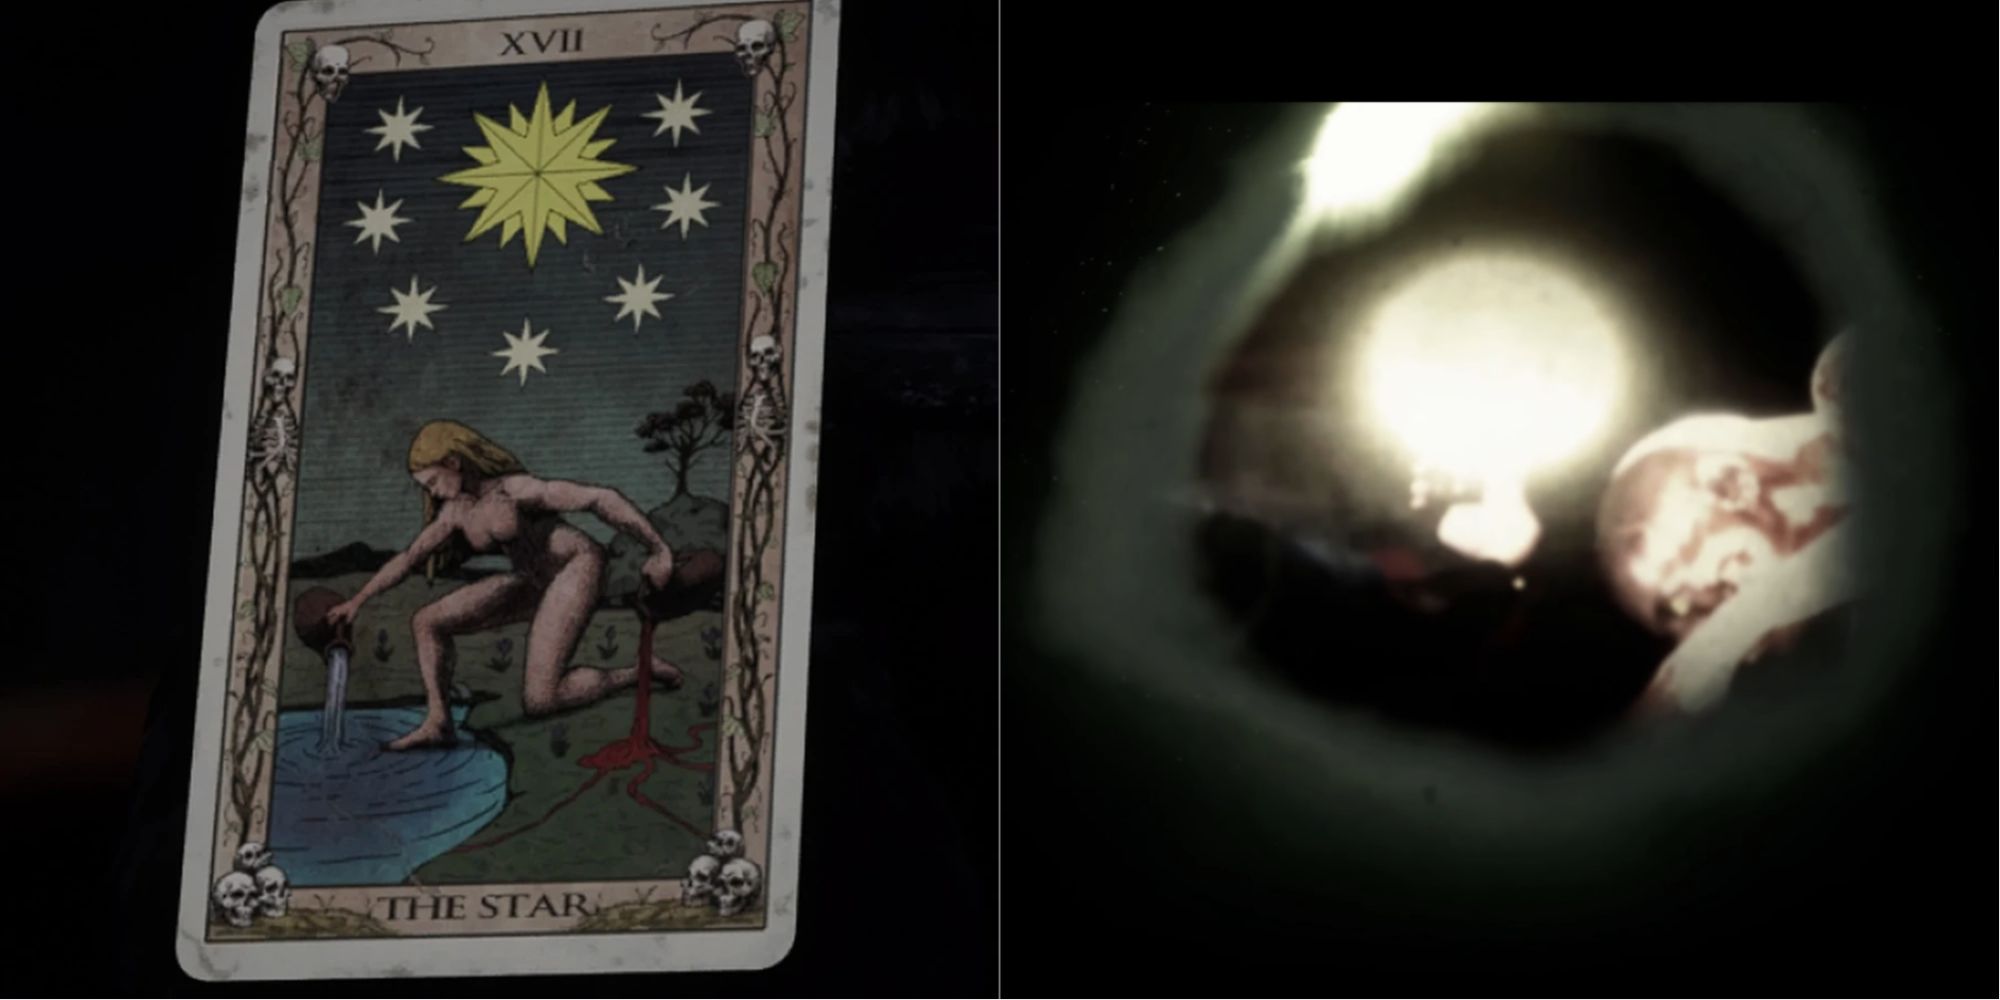 The Quarry's Major arcana rendition of the tarot card The Star on the left. On the right Emma takes a photo of the creature 